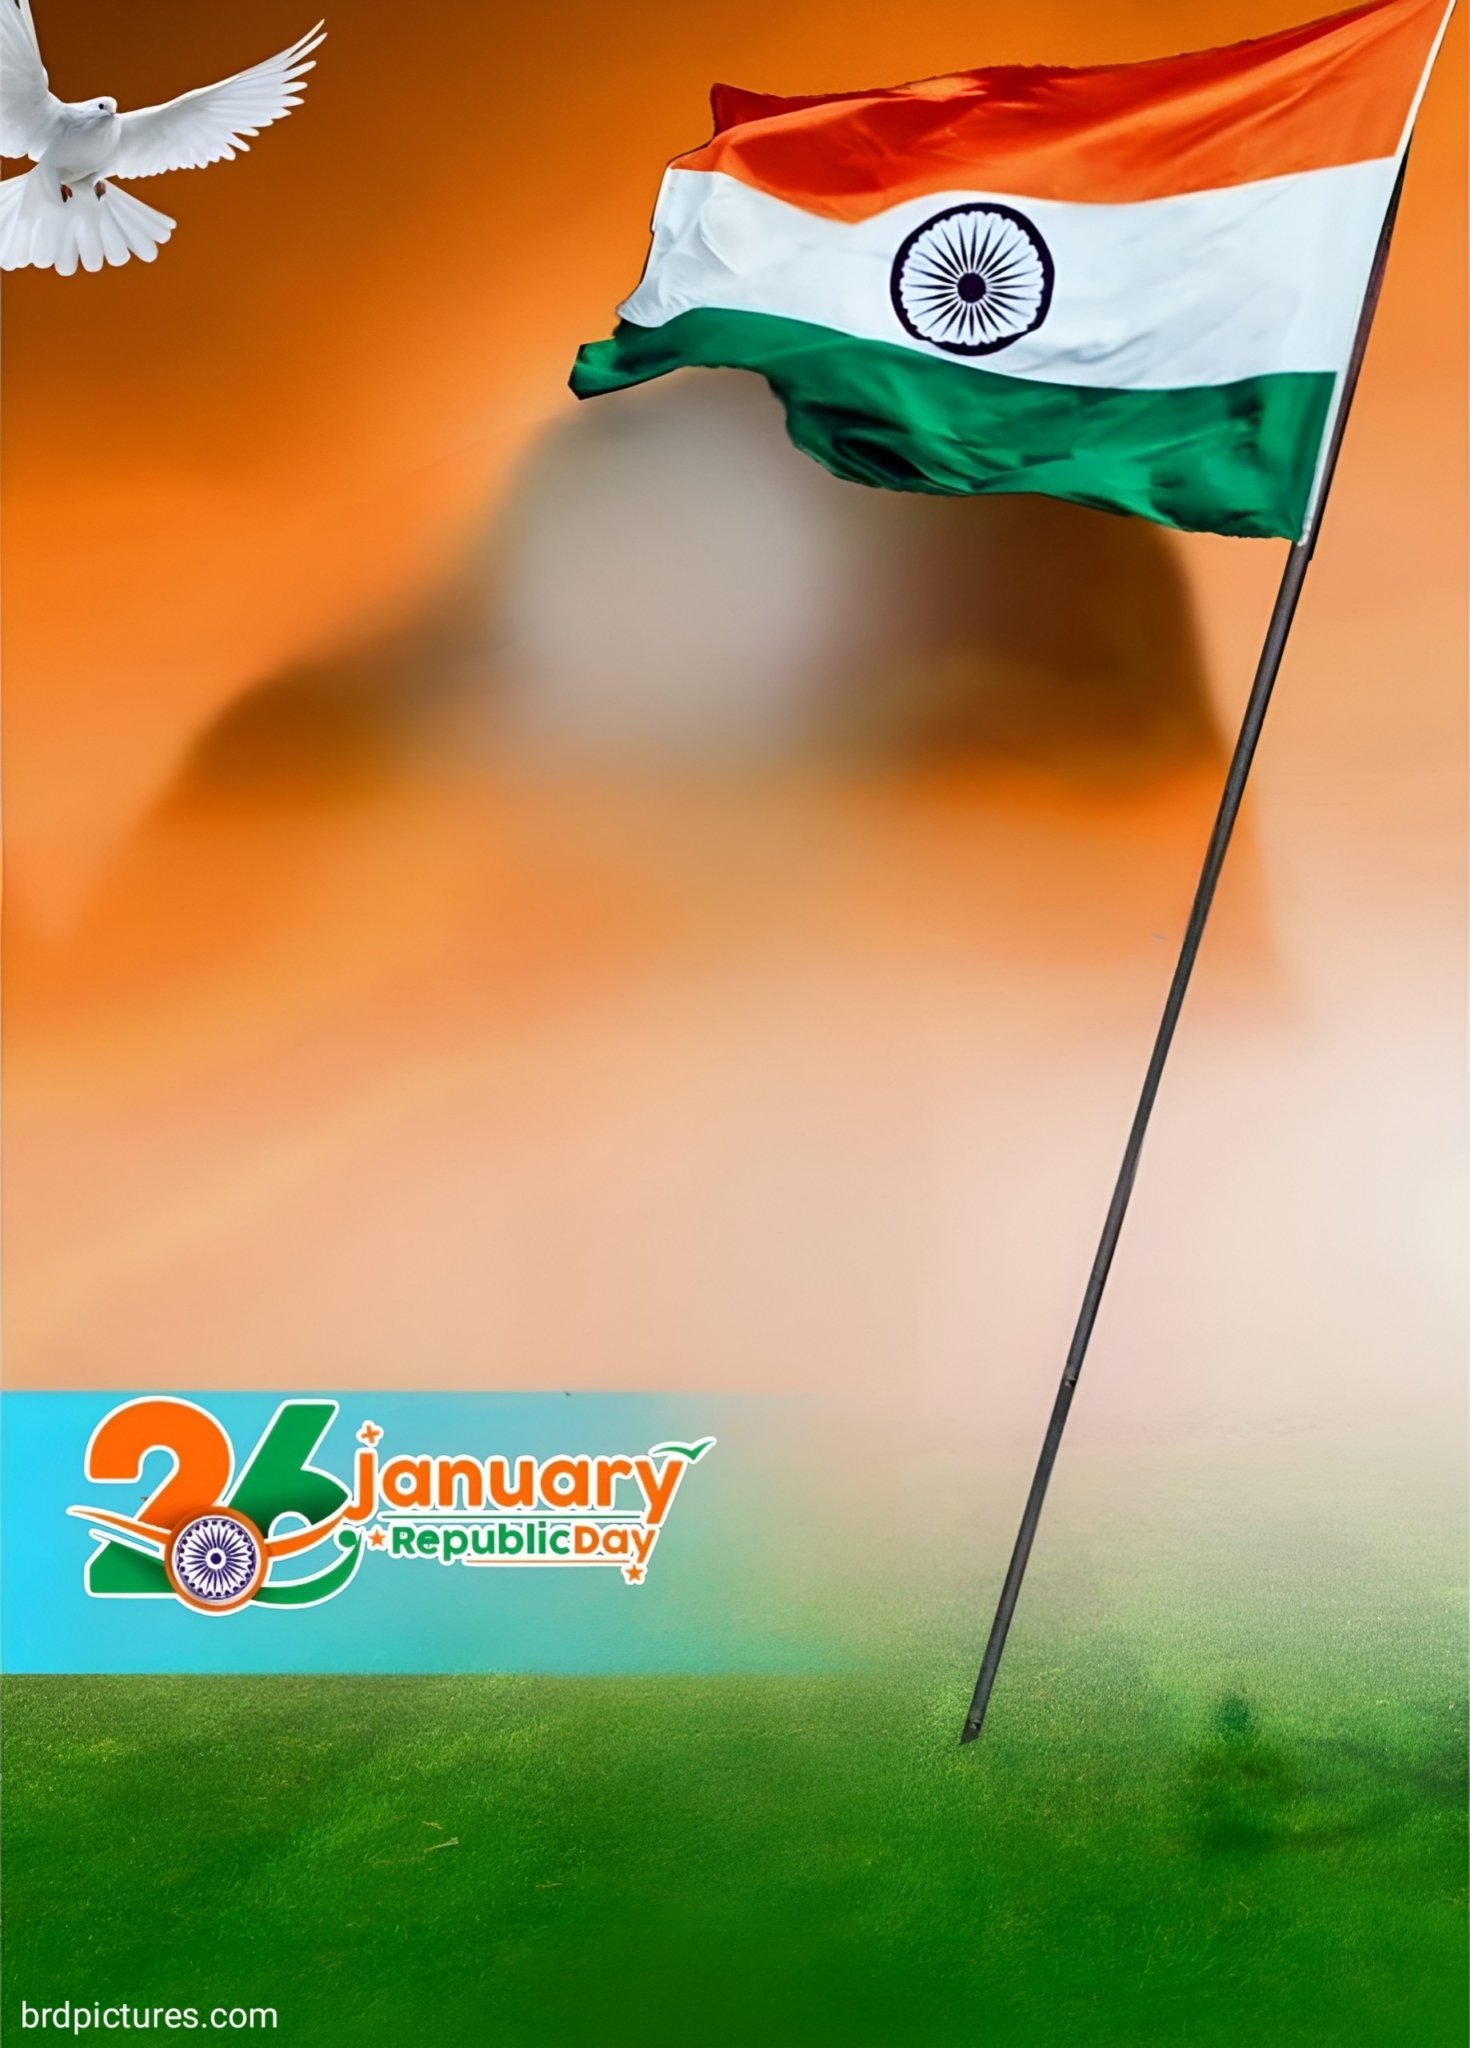 26 January Indian Flag Background Wallpaper 4k For Editing